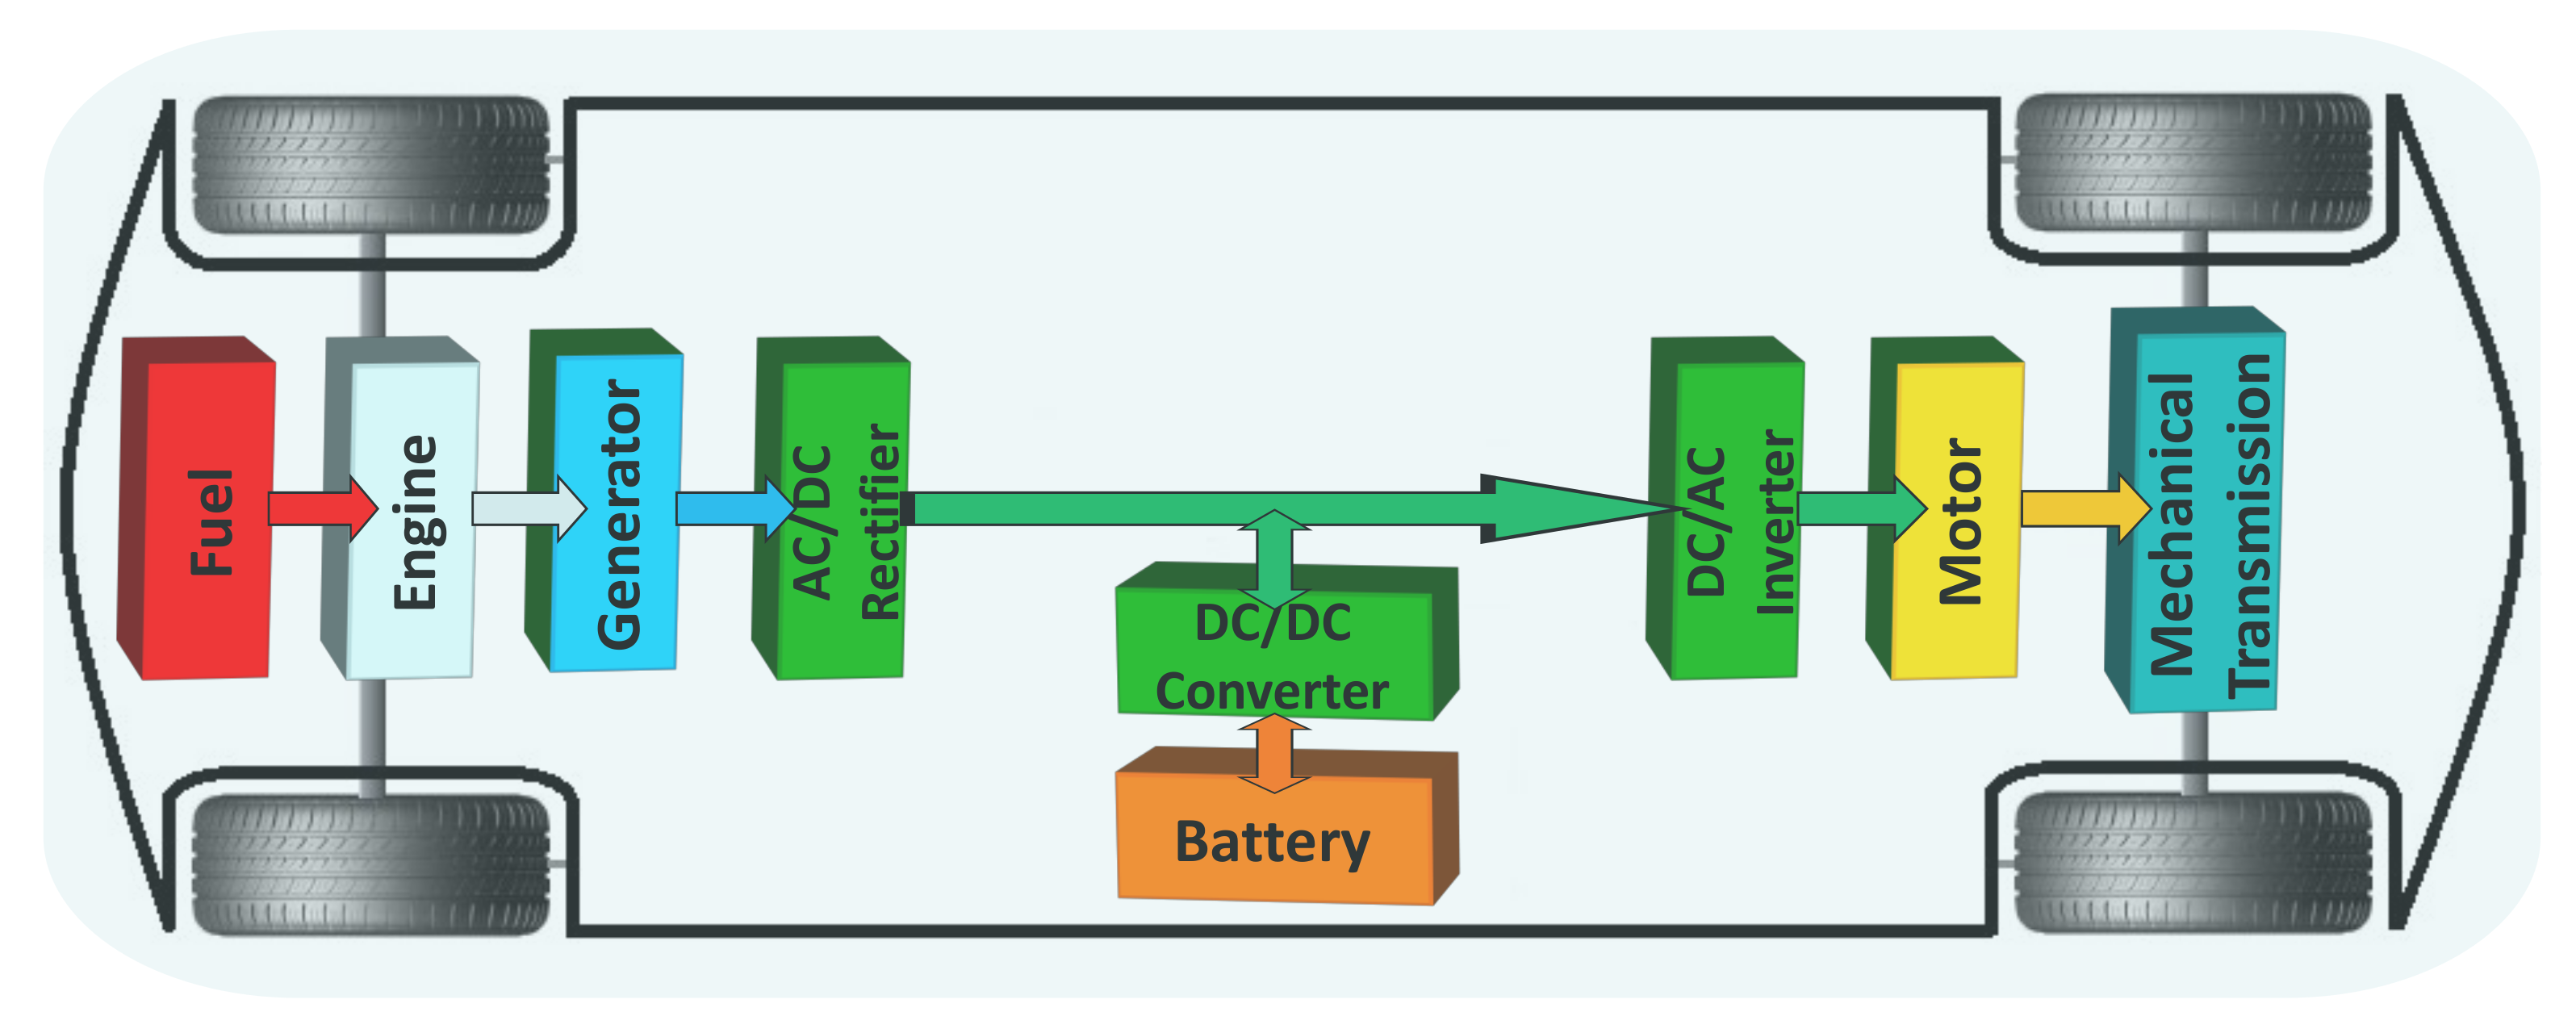 Energies | Free Full-Text | A Review of DC-AC Converters for Electric  Vehicle Applications | HTML